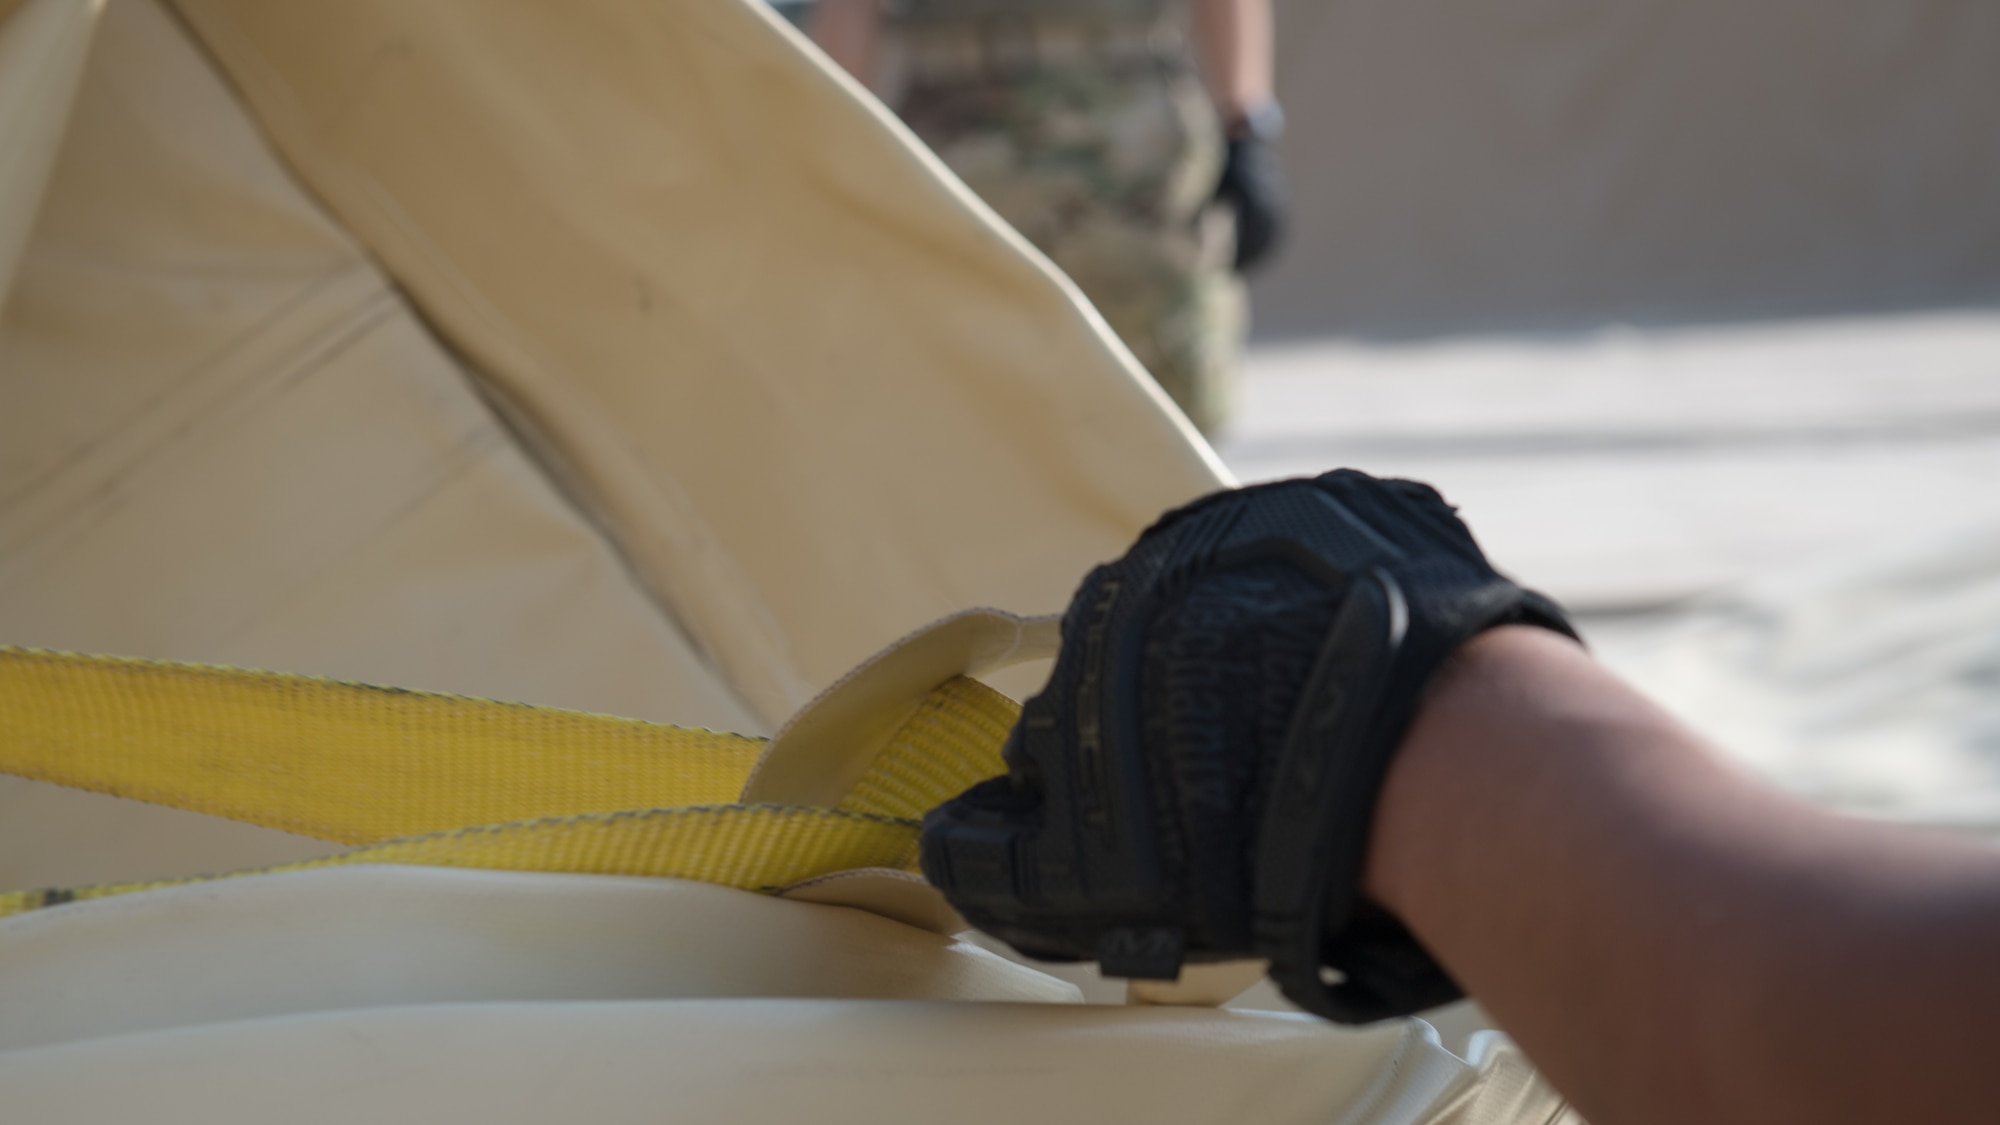 A U.S. Air Force Airman with the 386th Expeditionary Logistics Readiness Squadron fuels management flight loosens a strap on a new fuel bladder at Ali Al Salem Air Base, Kuwait, Oct. 7, 2019. Fuel bladders are replaced every three-to-four years after they become unserviceable. (U.S. Air Force photo by Tech. Sgt. Daniel Martinez)